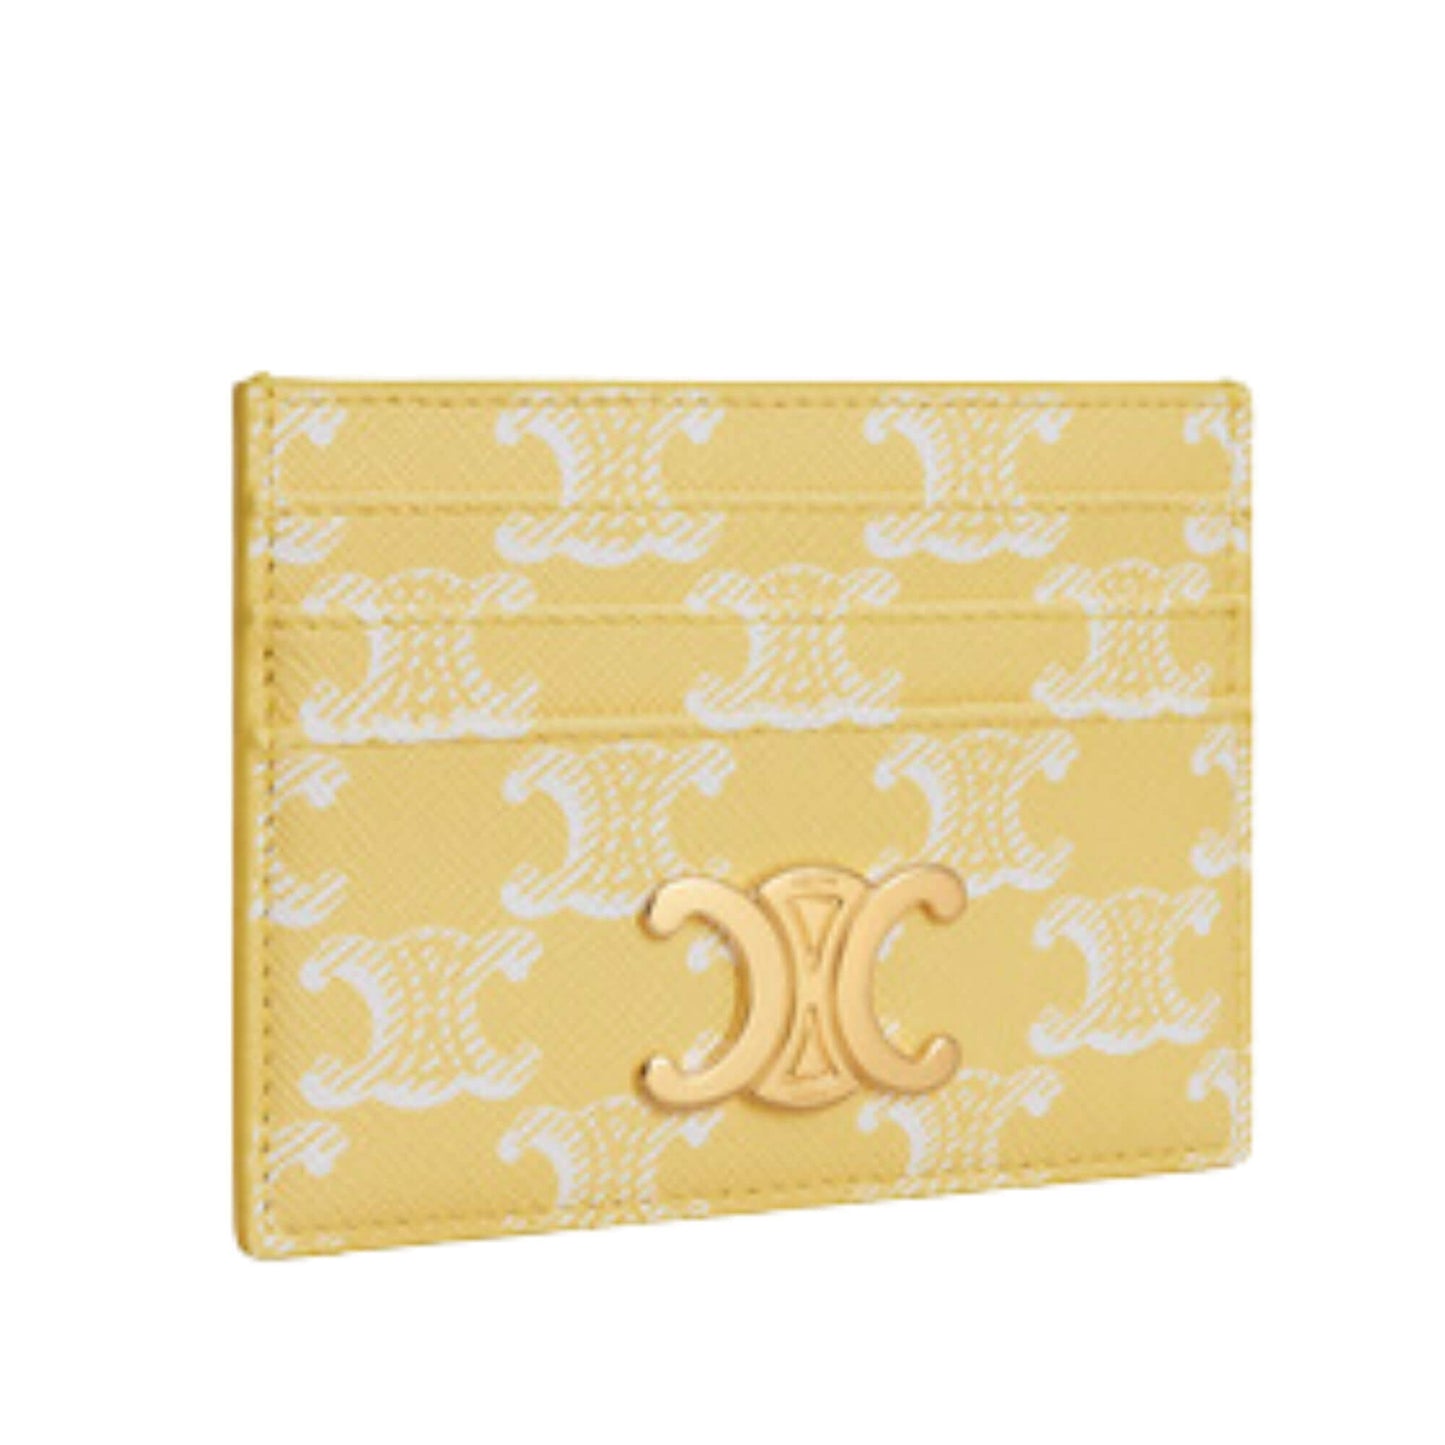 CELINE TRIOMPHE CARD HOLDER IN TRIOMPHE CANVAS BRIGHT YELLOW